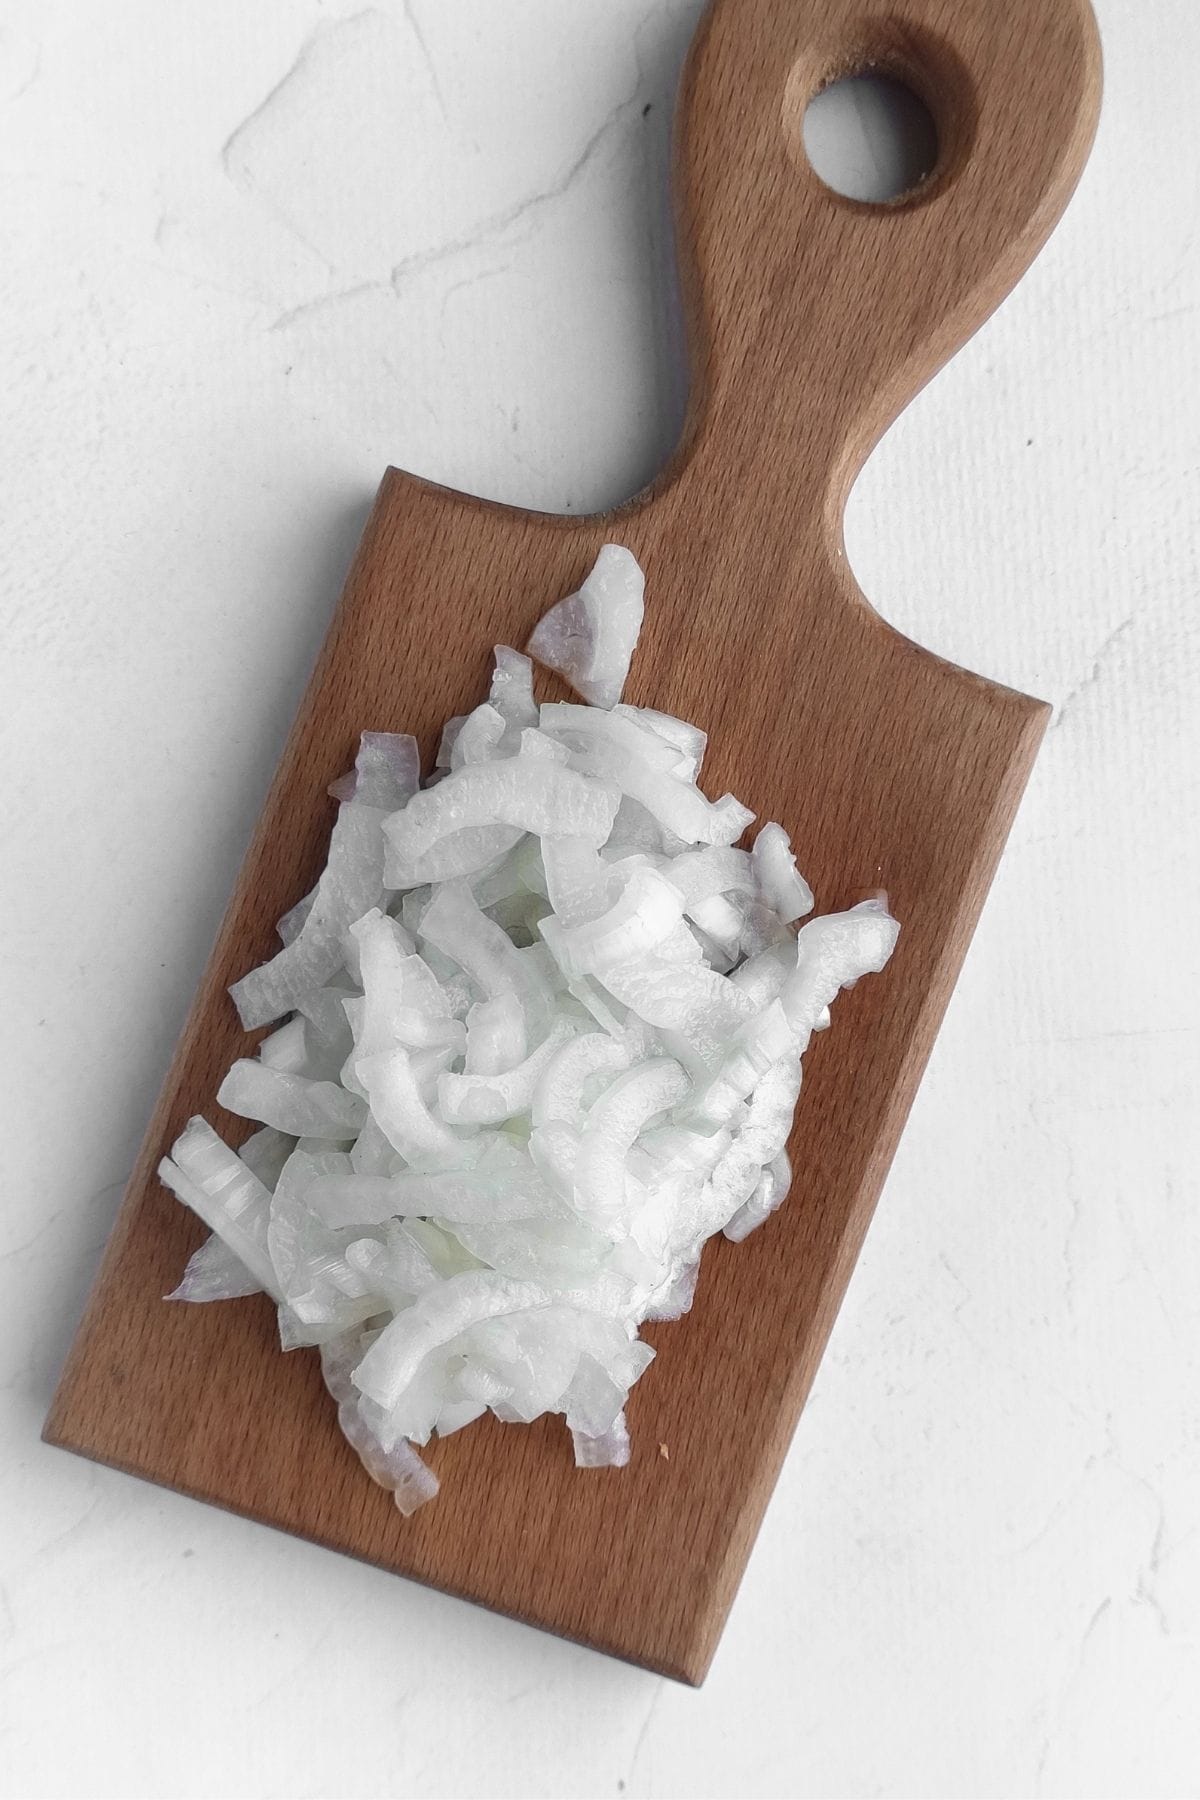 Onion chopped up on a wooden cutting board.